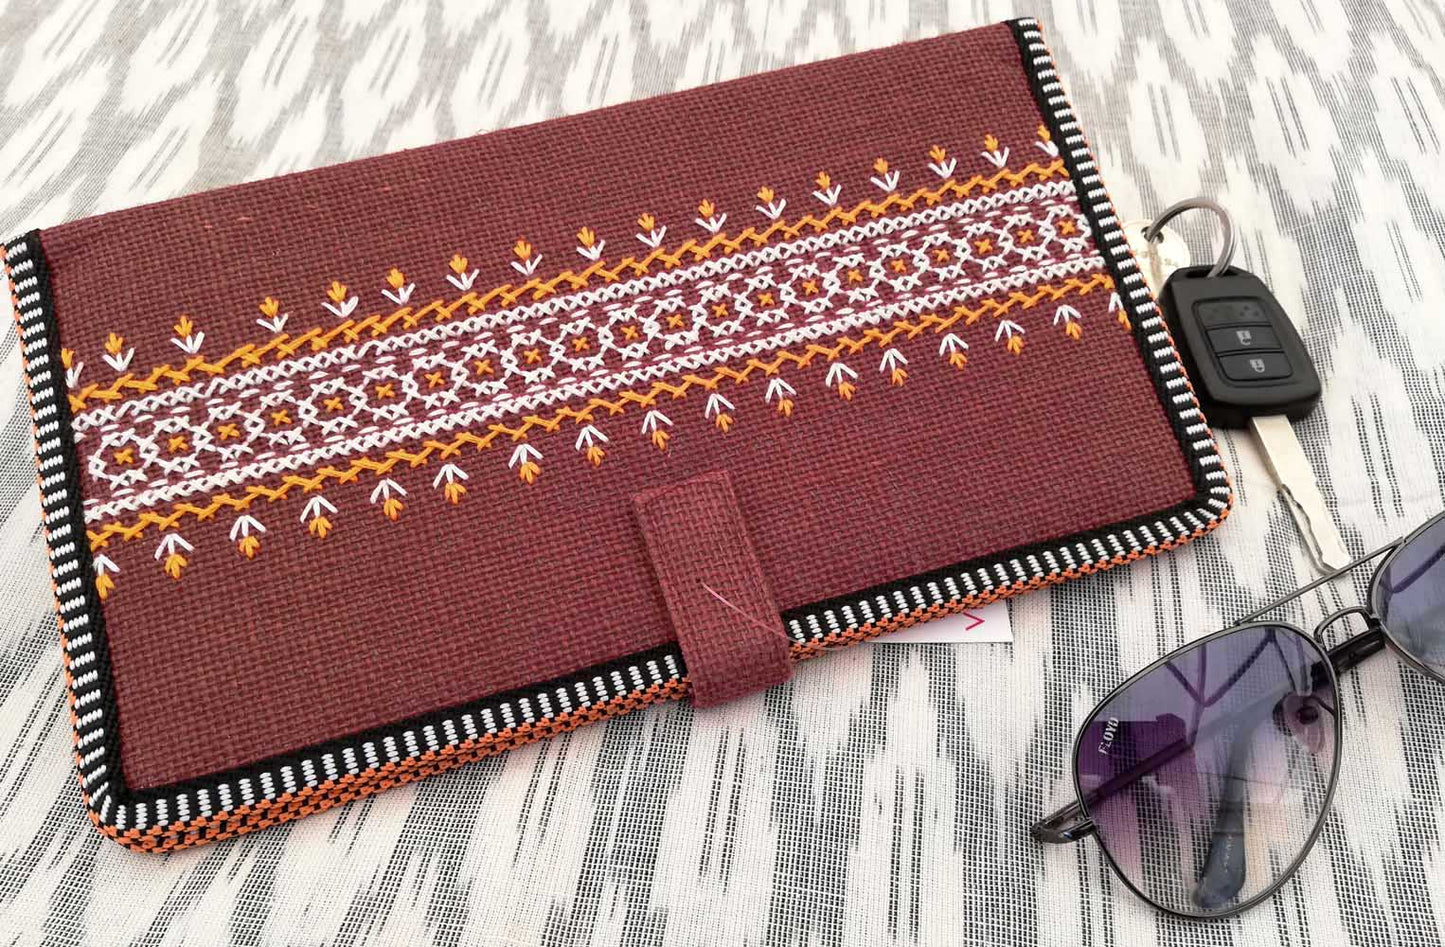 Handcrafted Jute Passport Cover with cross stitch Embroidery